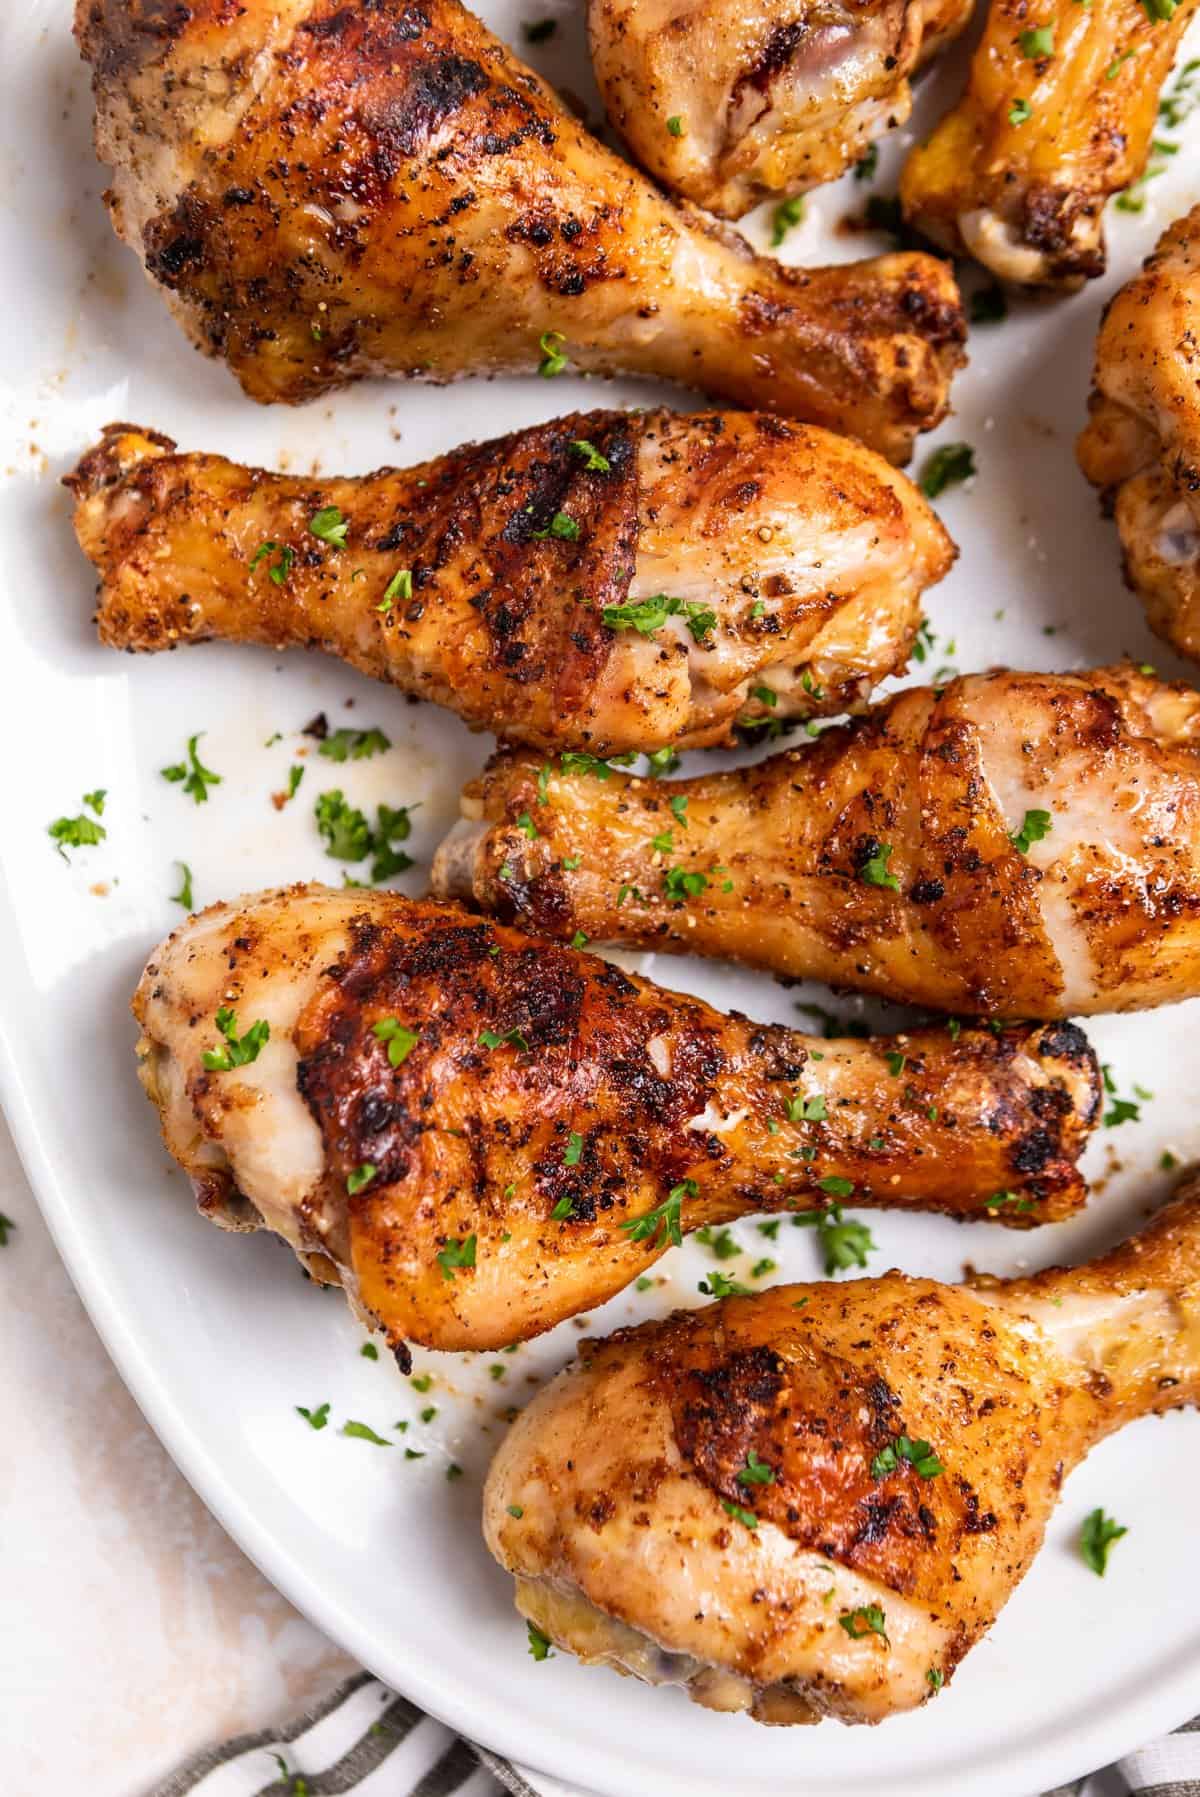 Grilled chicken legs on plate with chopped parsley.